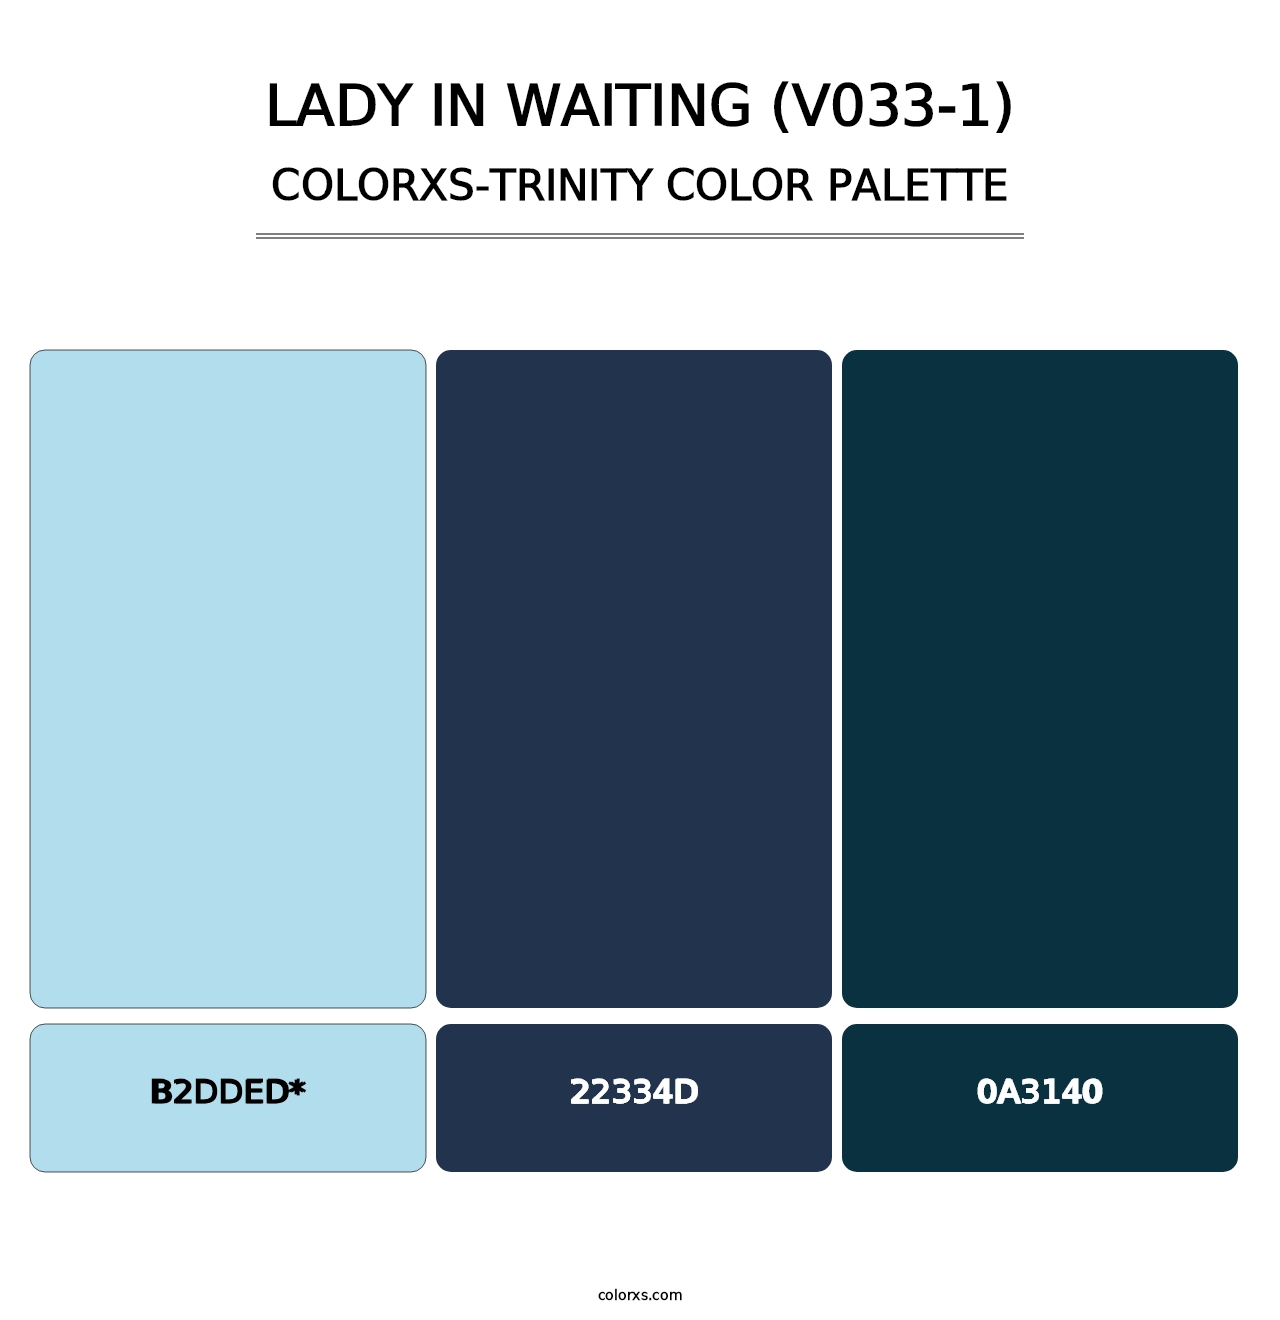 Lady in Waiting (V033-1) - Colorxs Trinity Palette